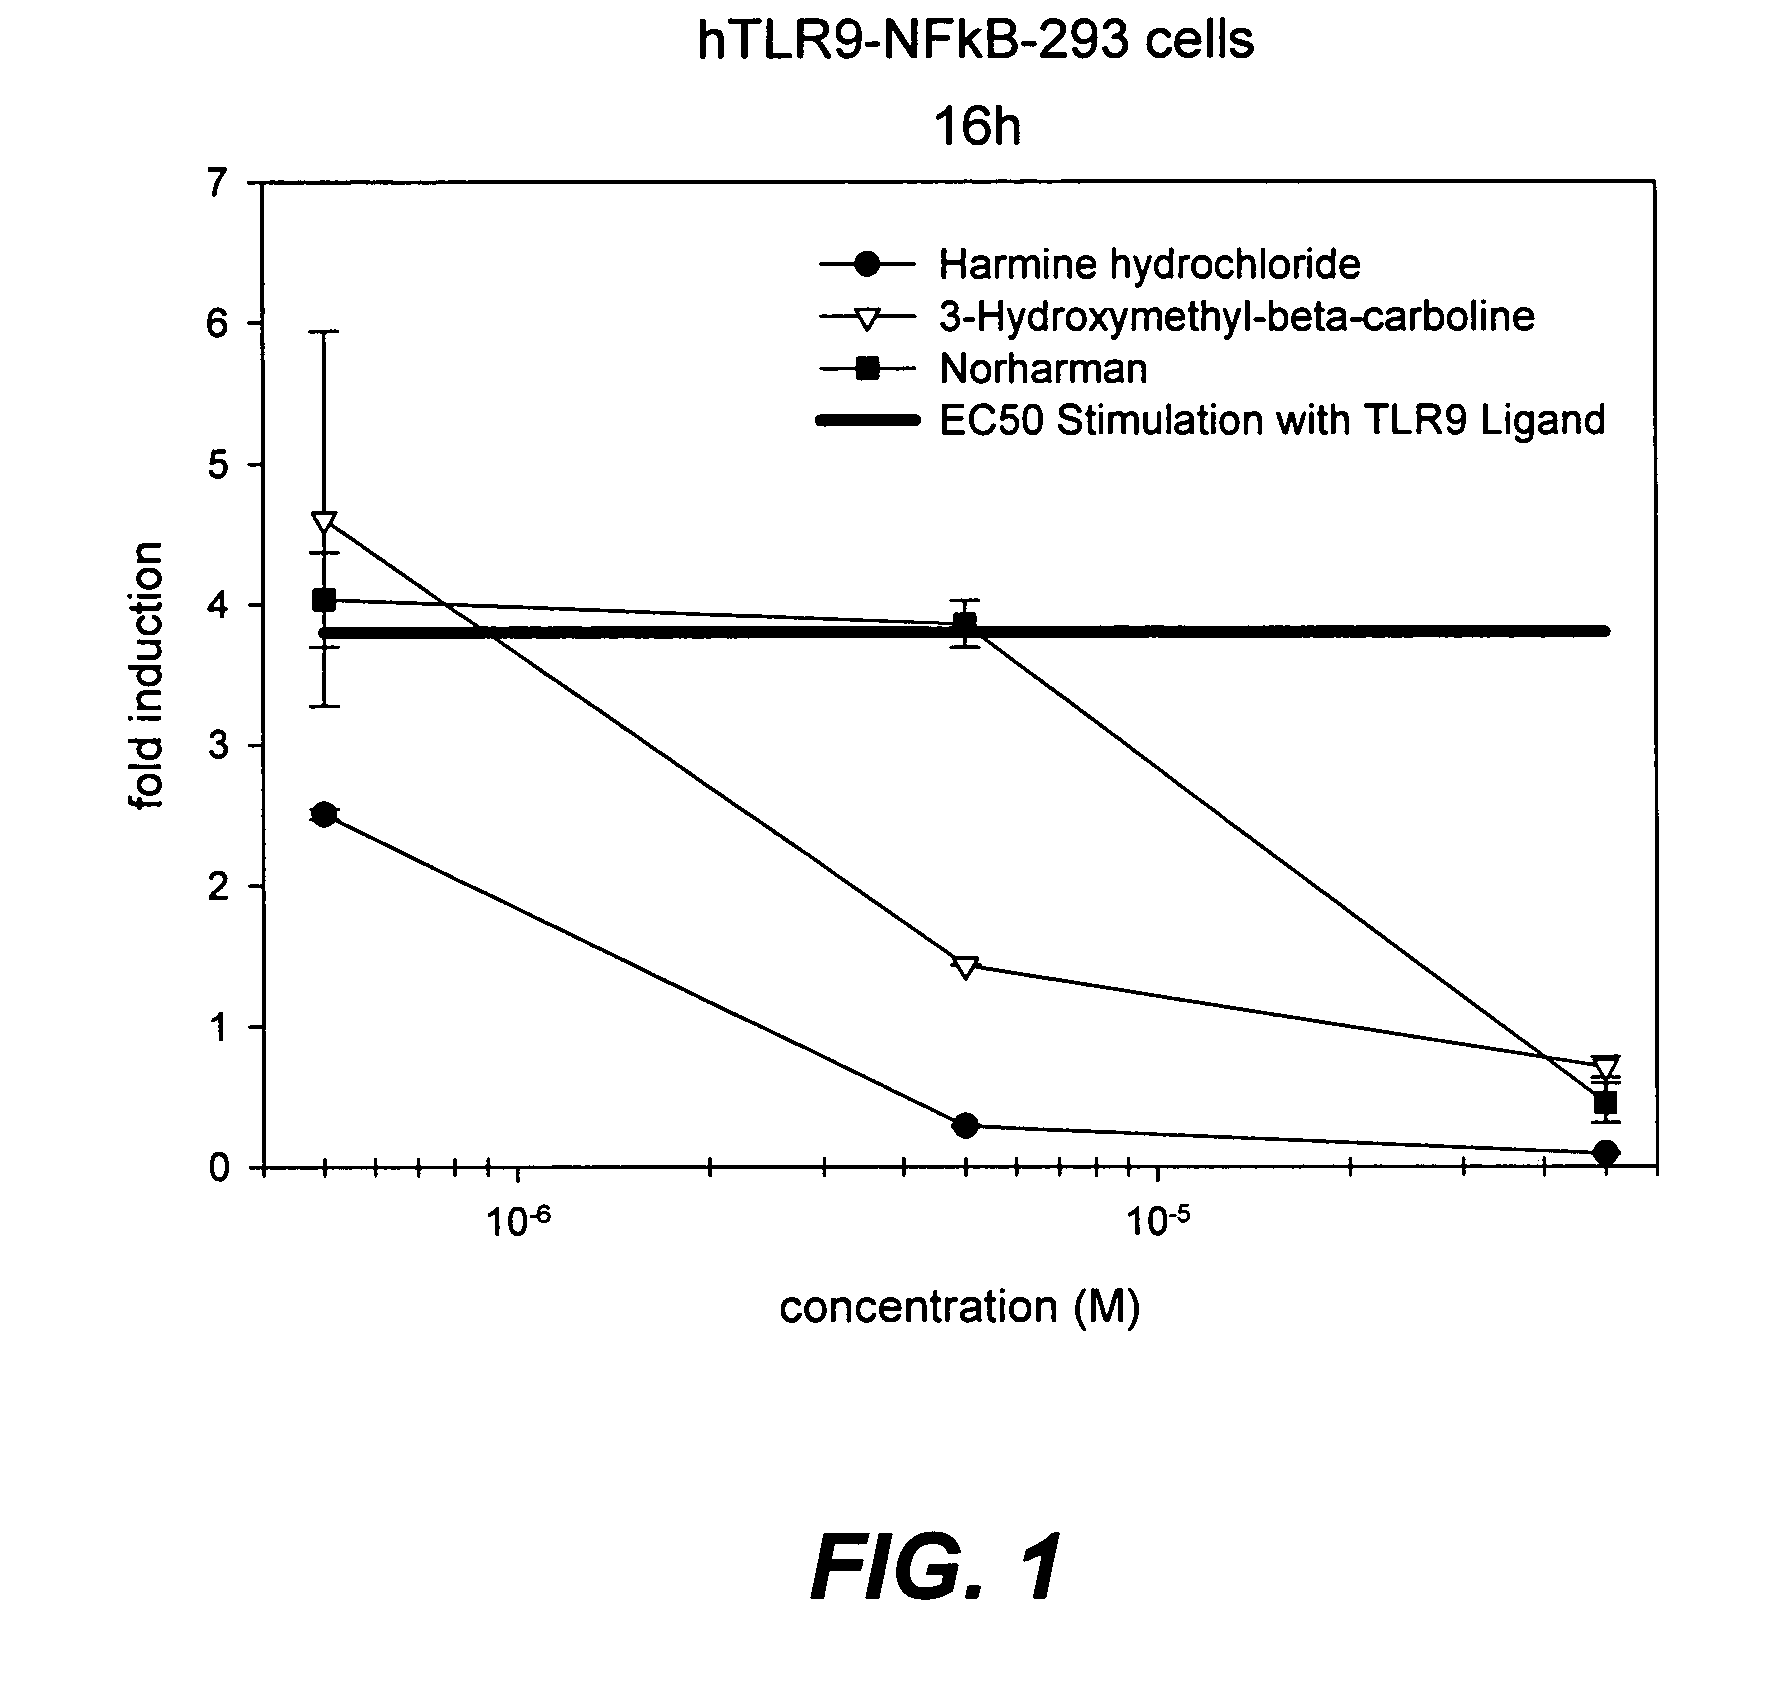 Small molecule toll-like receptor (TLR) antagonists